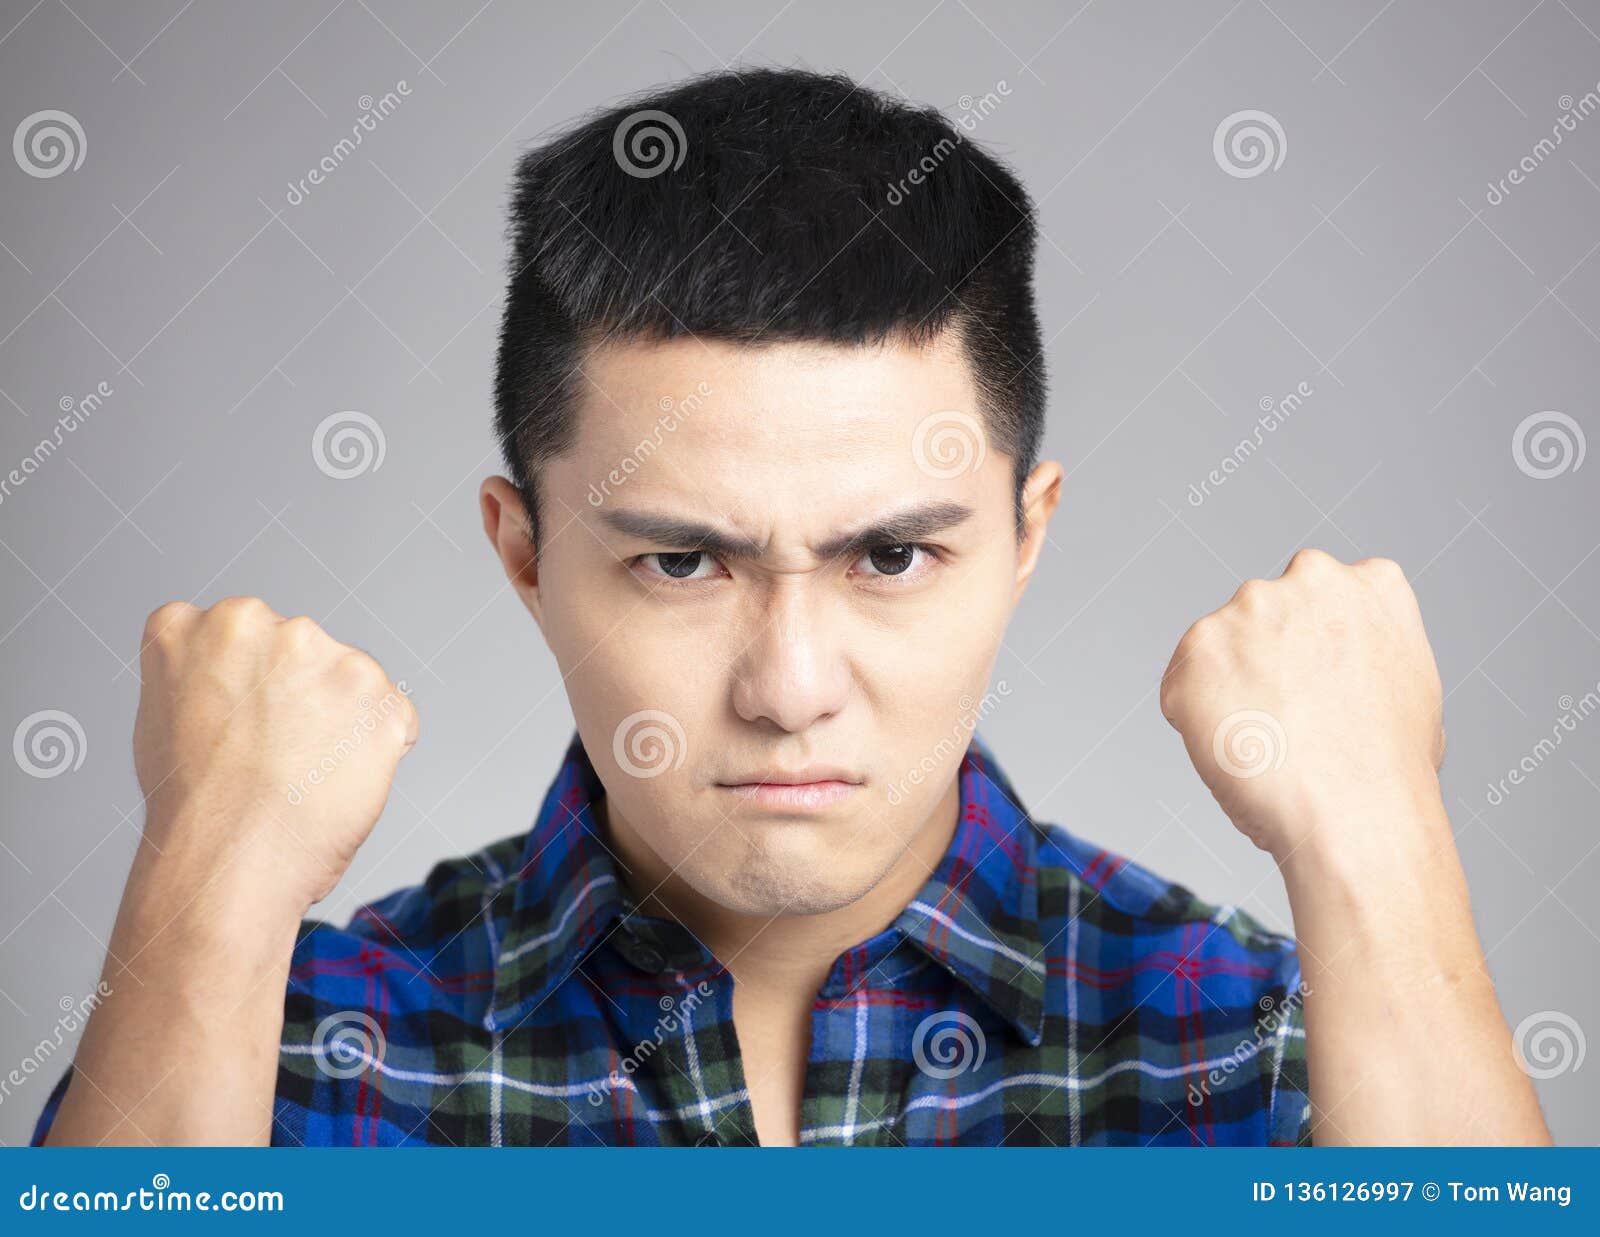 man with angry and mad face